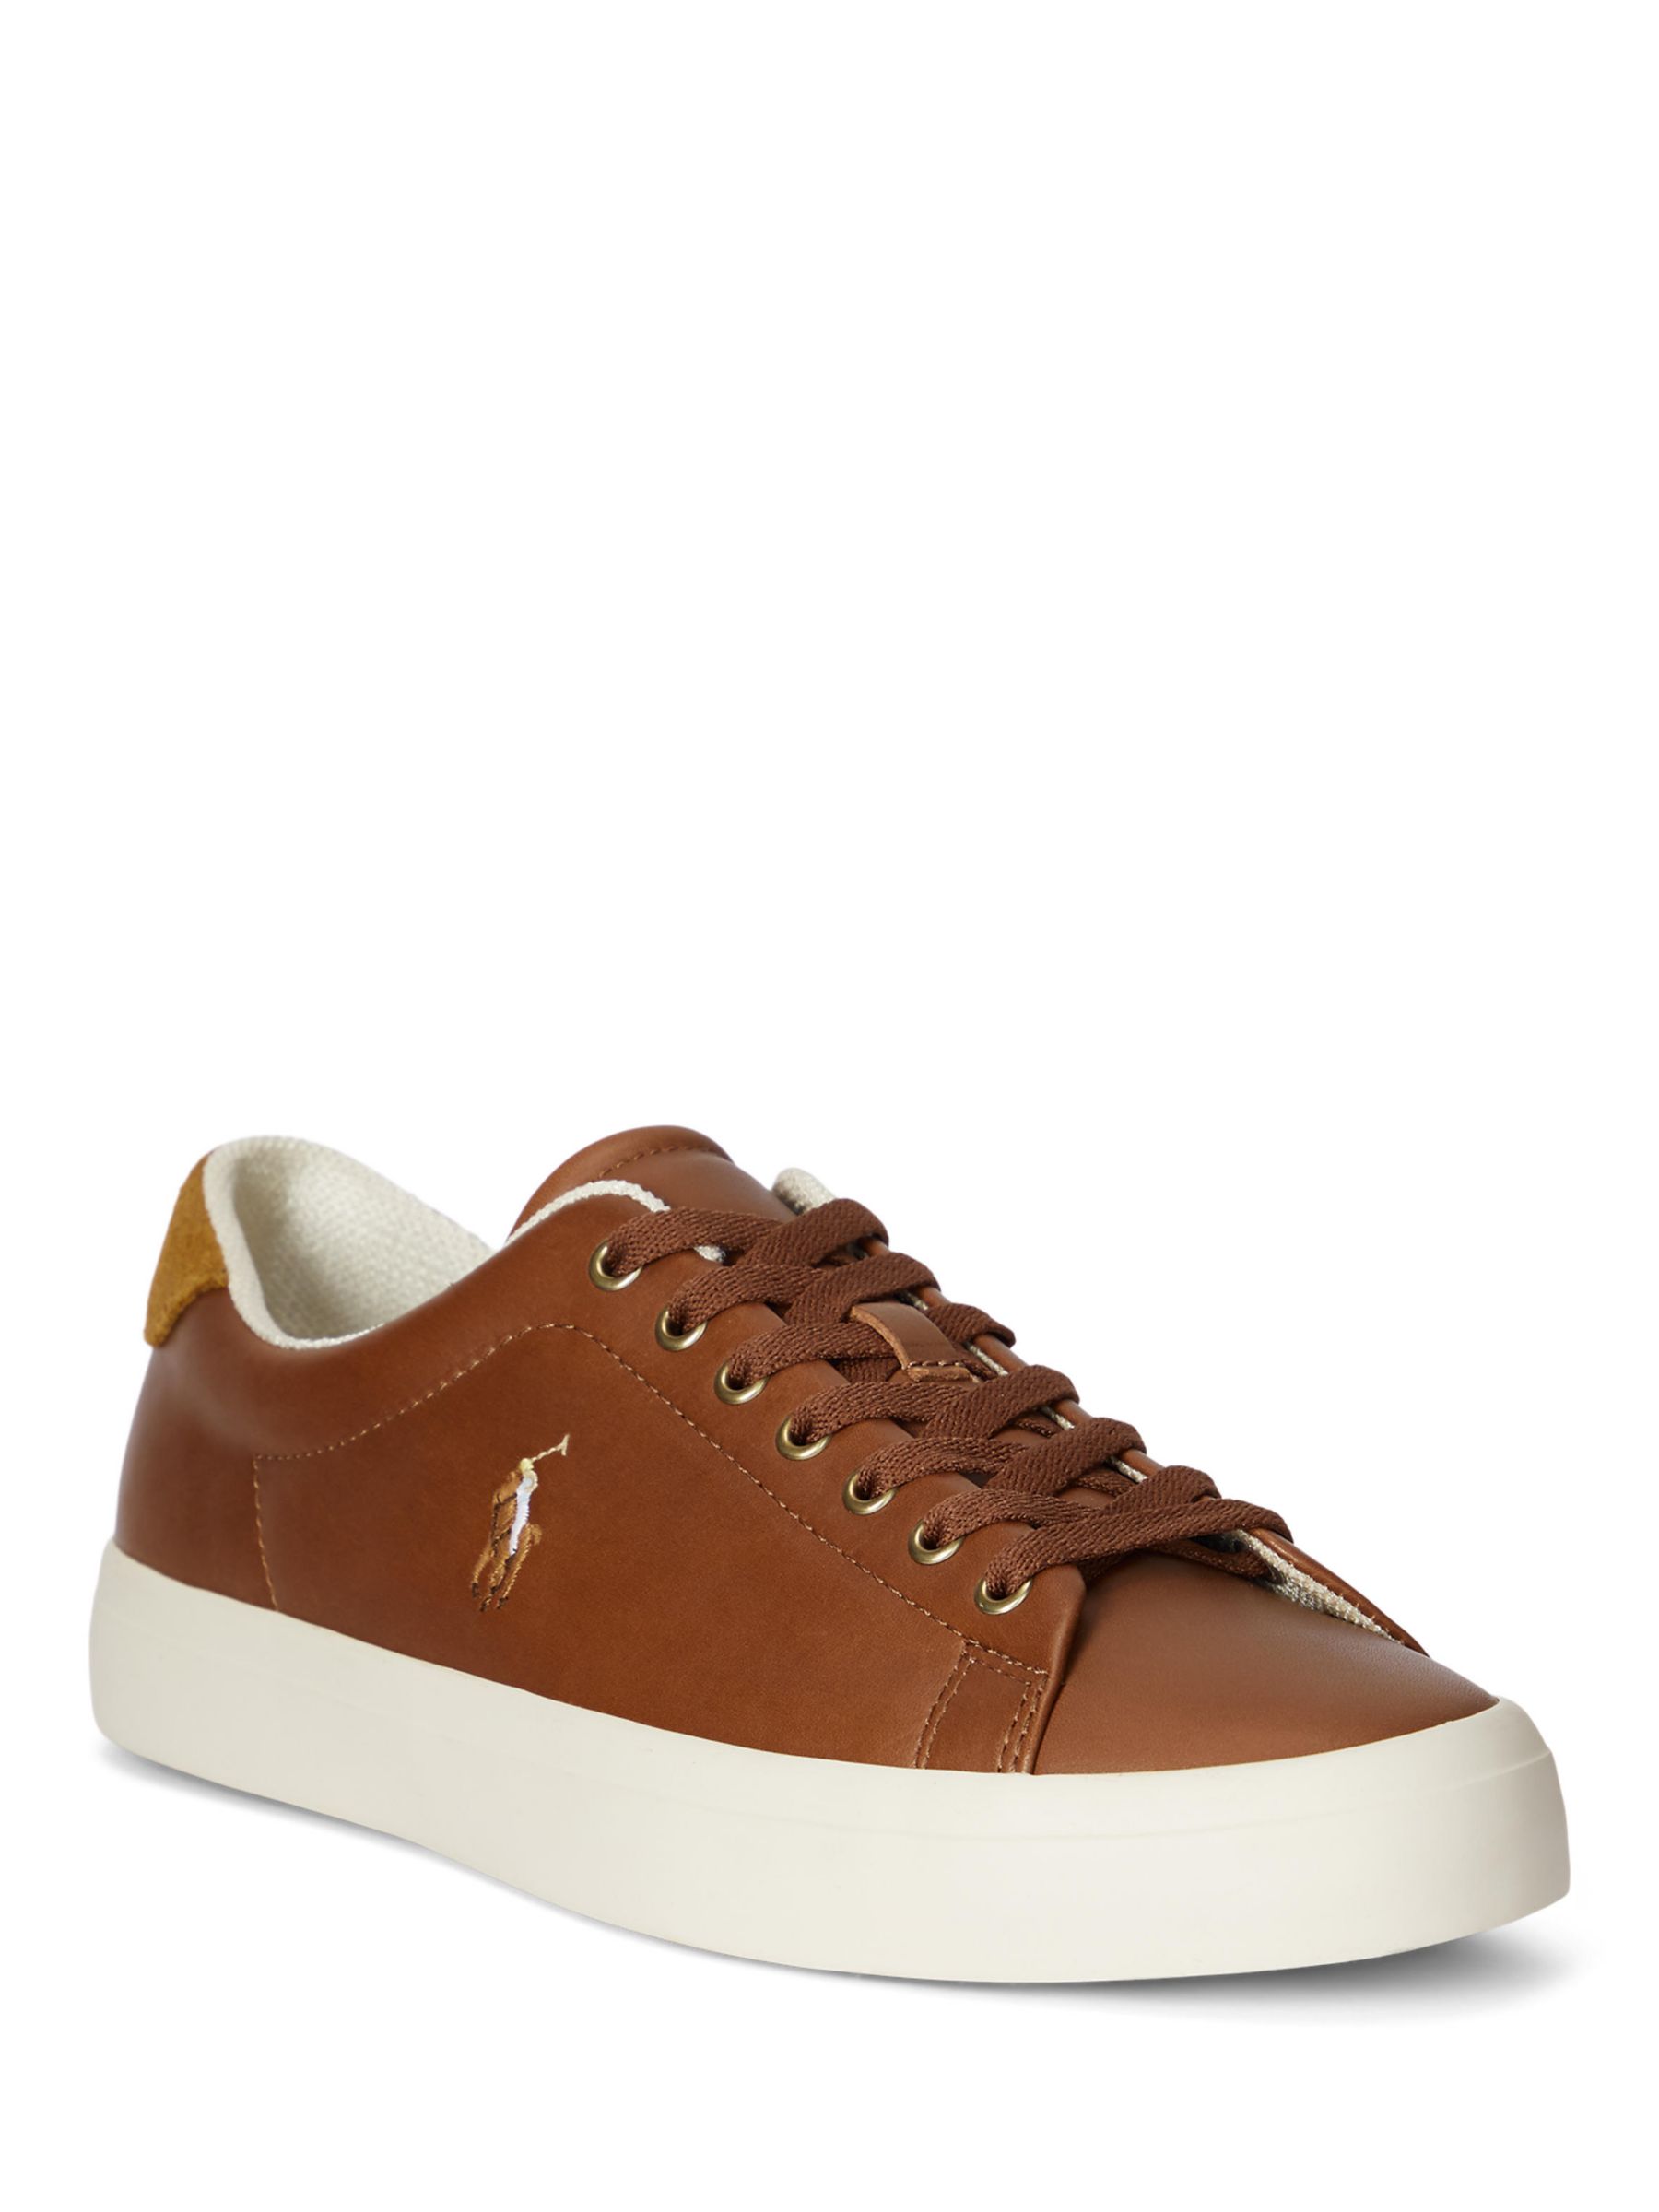 Buy Polo Ralph Lauren Longwood Leather Trainers, Tan Online at johnlewis.com